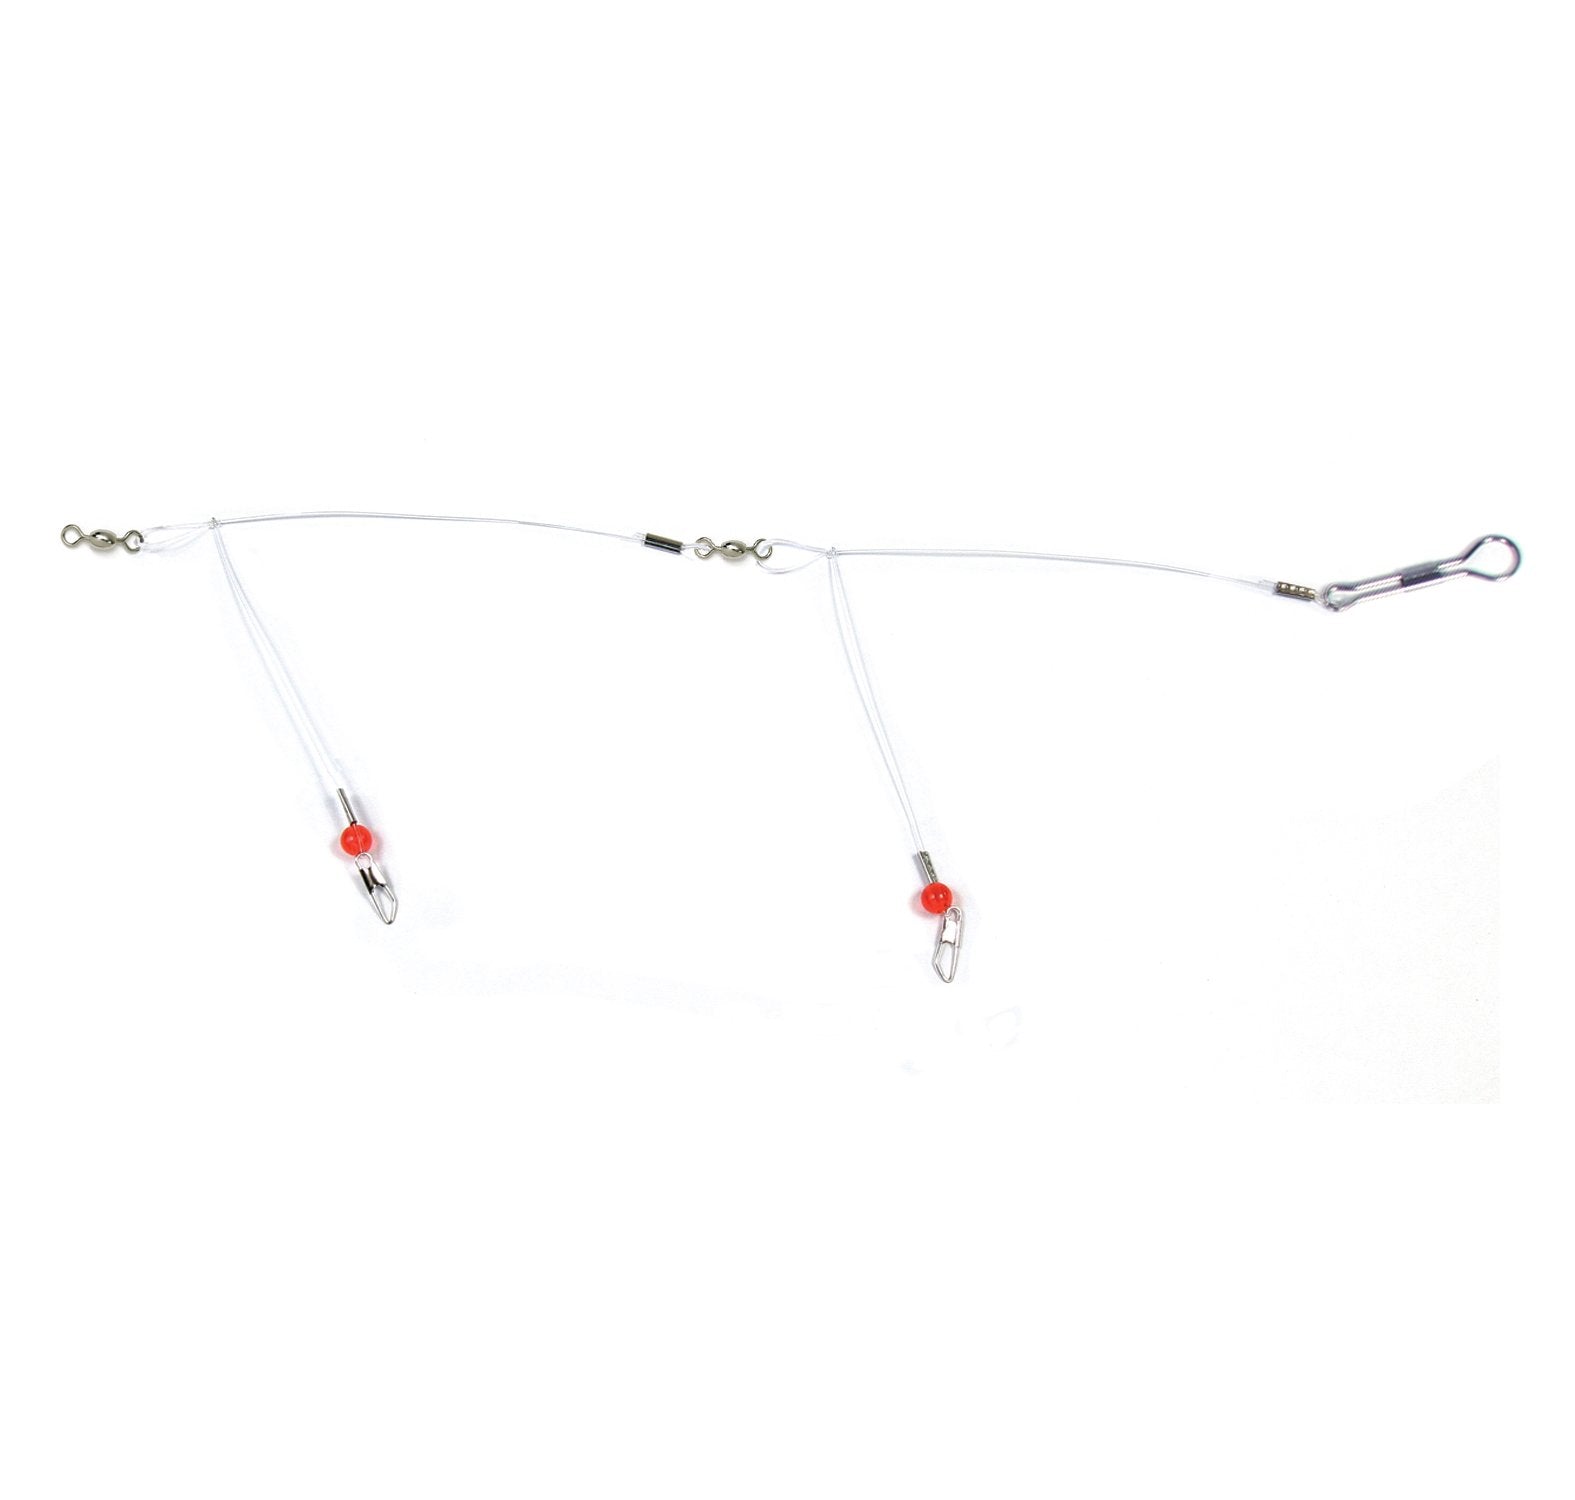 South Bend® Crappie Rig Leader Hook, Size 8 - Jay C Food Stores